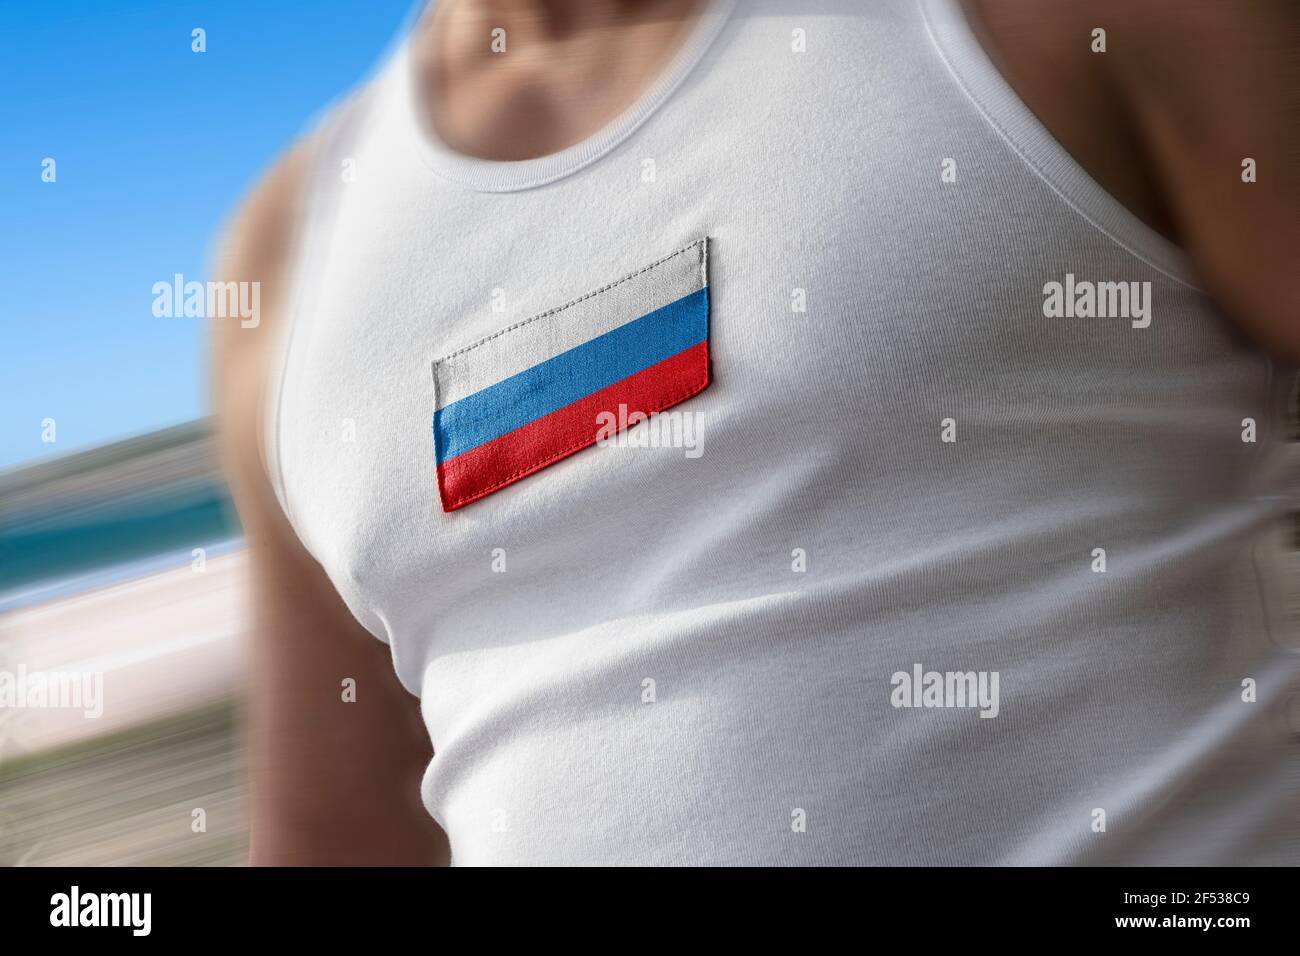 The national flag of Russia on the athlete's chest Stock Photo